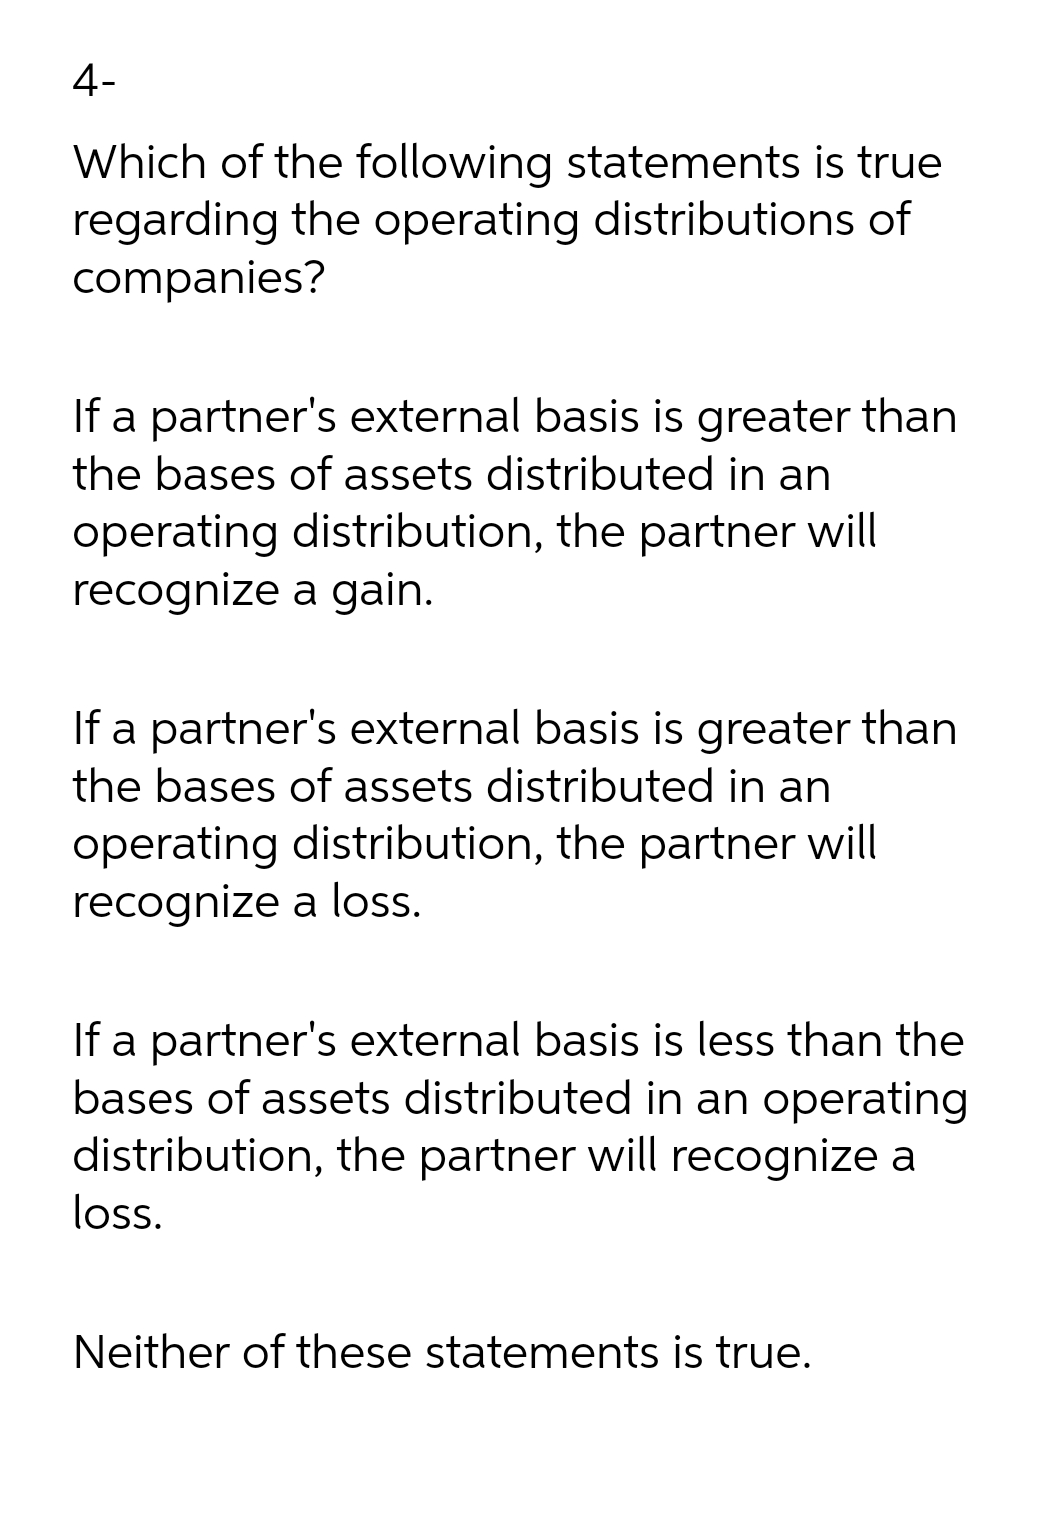 4-
Which of the following statements is true
regarding the operating distributions of
companies?
If a partner's external basis is greater than
the bases of assets distributed in an
operating distribution, the partner will
recognize a gain.
If a partner's external basis is greater than
the bases of assets distributed in an
operating distribution, the partner will
recognize a los.
If a partner's external basis is less than the
bases of assets distributed in an operating
distribution, the partner will recognize a
loss.
Neither of these statements is true.
